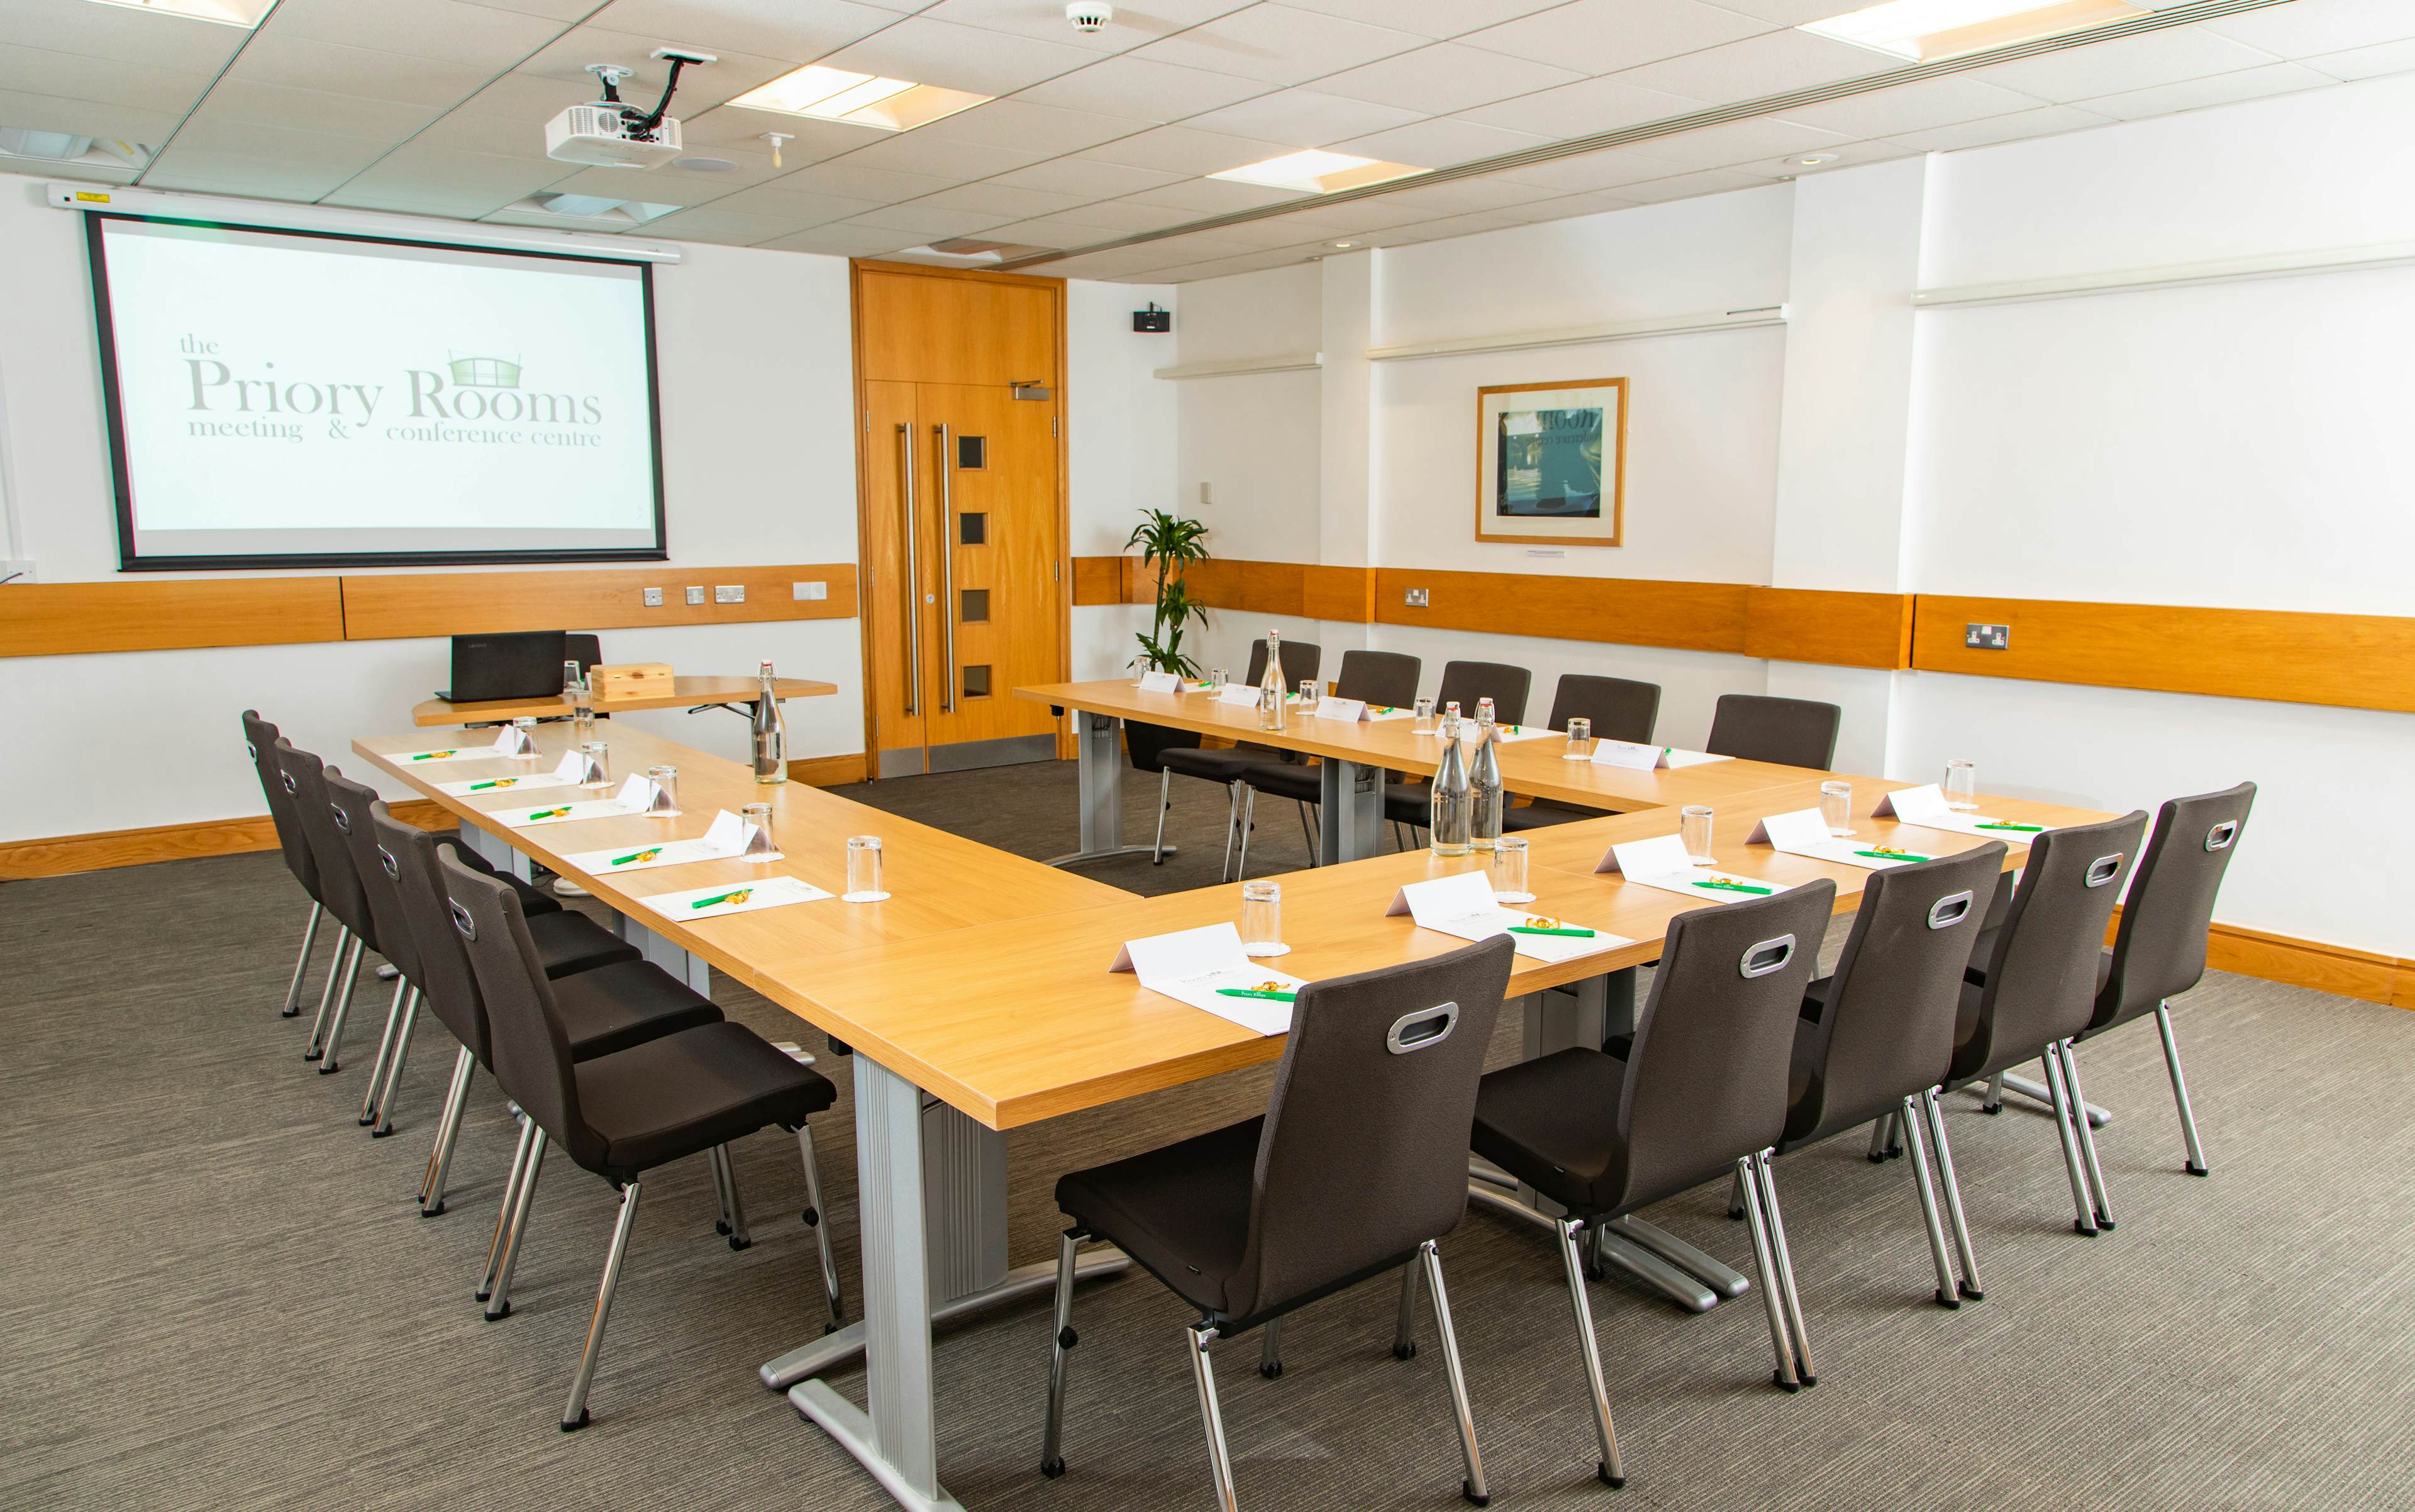 The Priory Rooms Meeting and Conference Centre  - William Penn  image 1